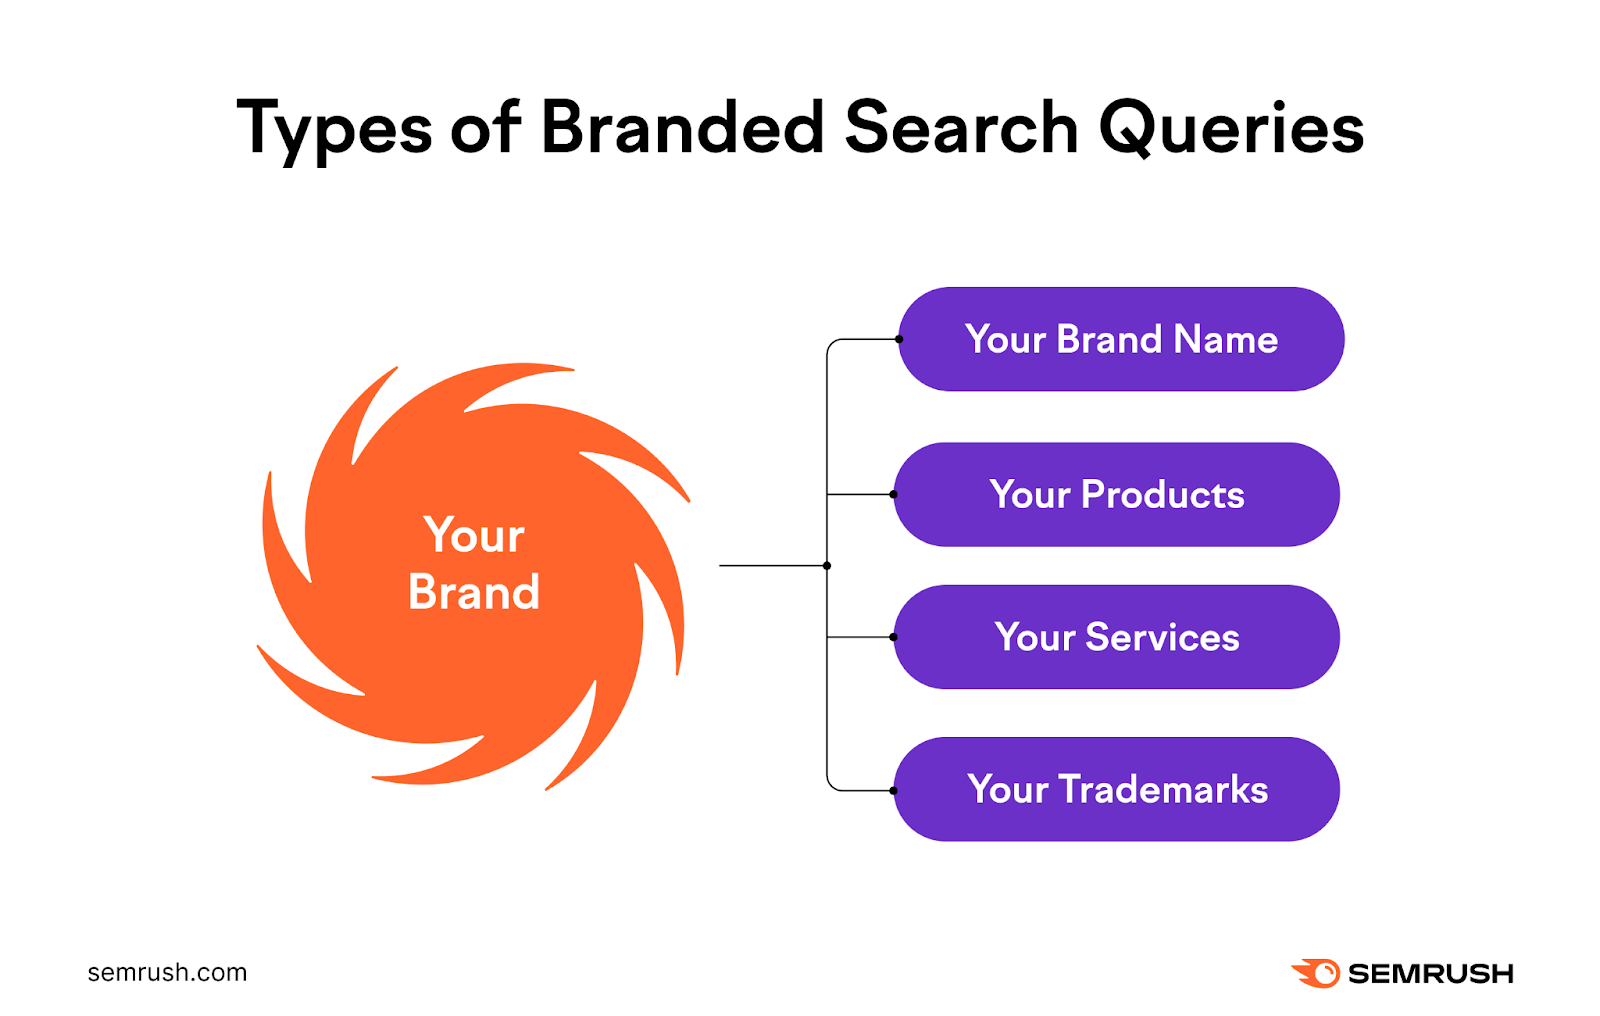 Types of branded hunt  queries see  your marque  name, products, services and trademarks